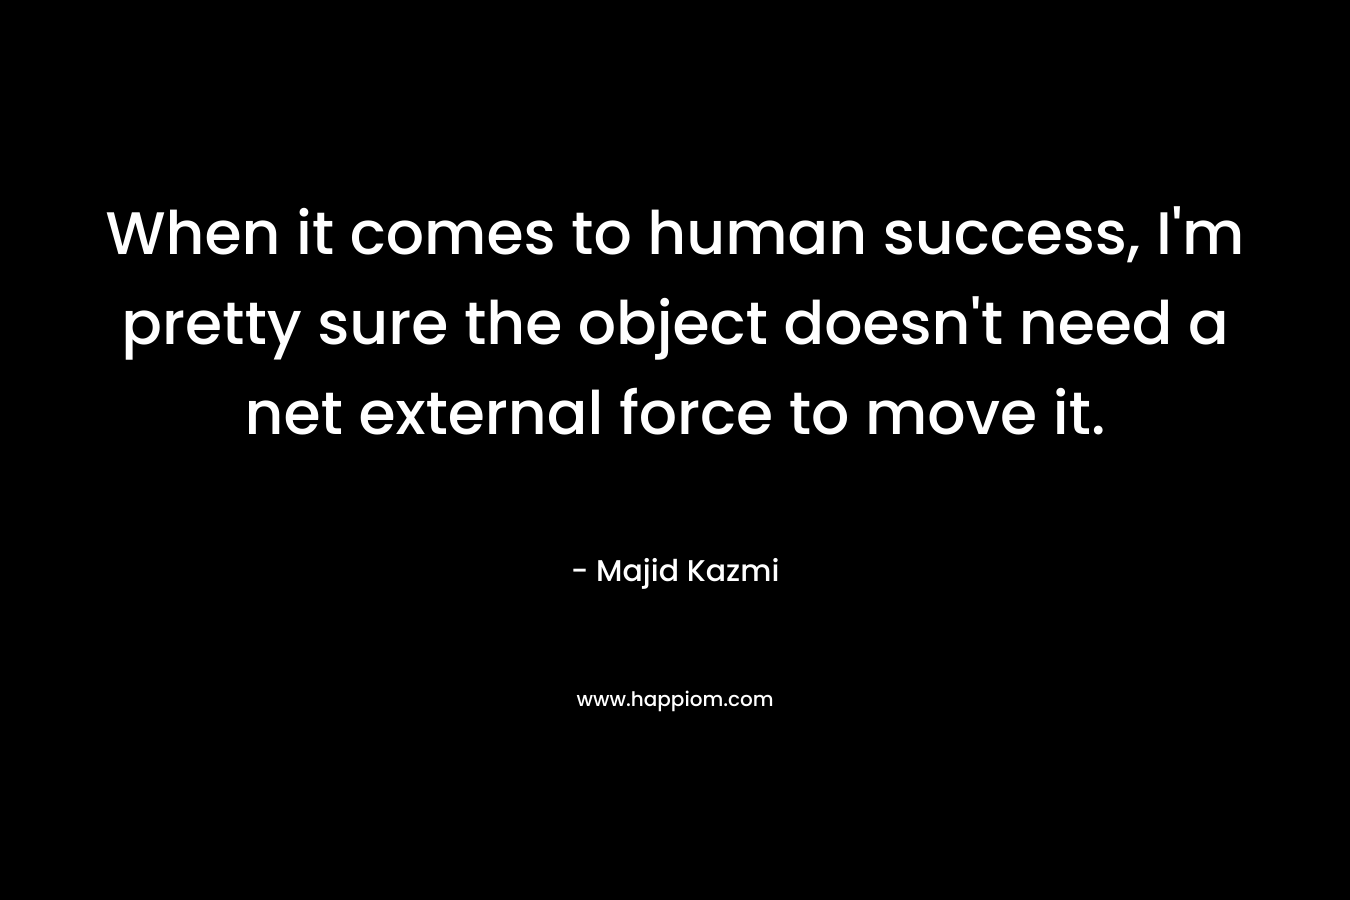 When it comes to human success, I’m pretty sure the object doesn’t need a net external force to move it. – Majid Kazmi